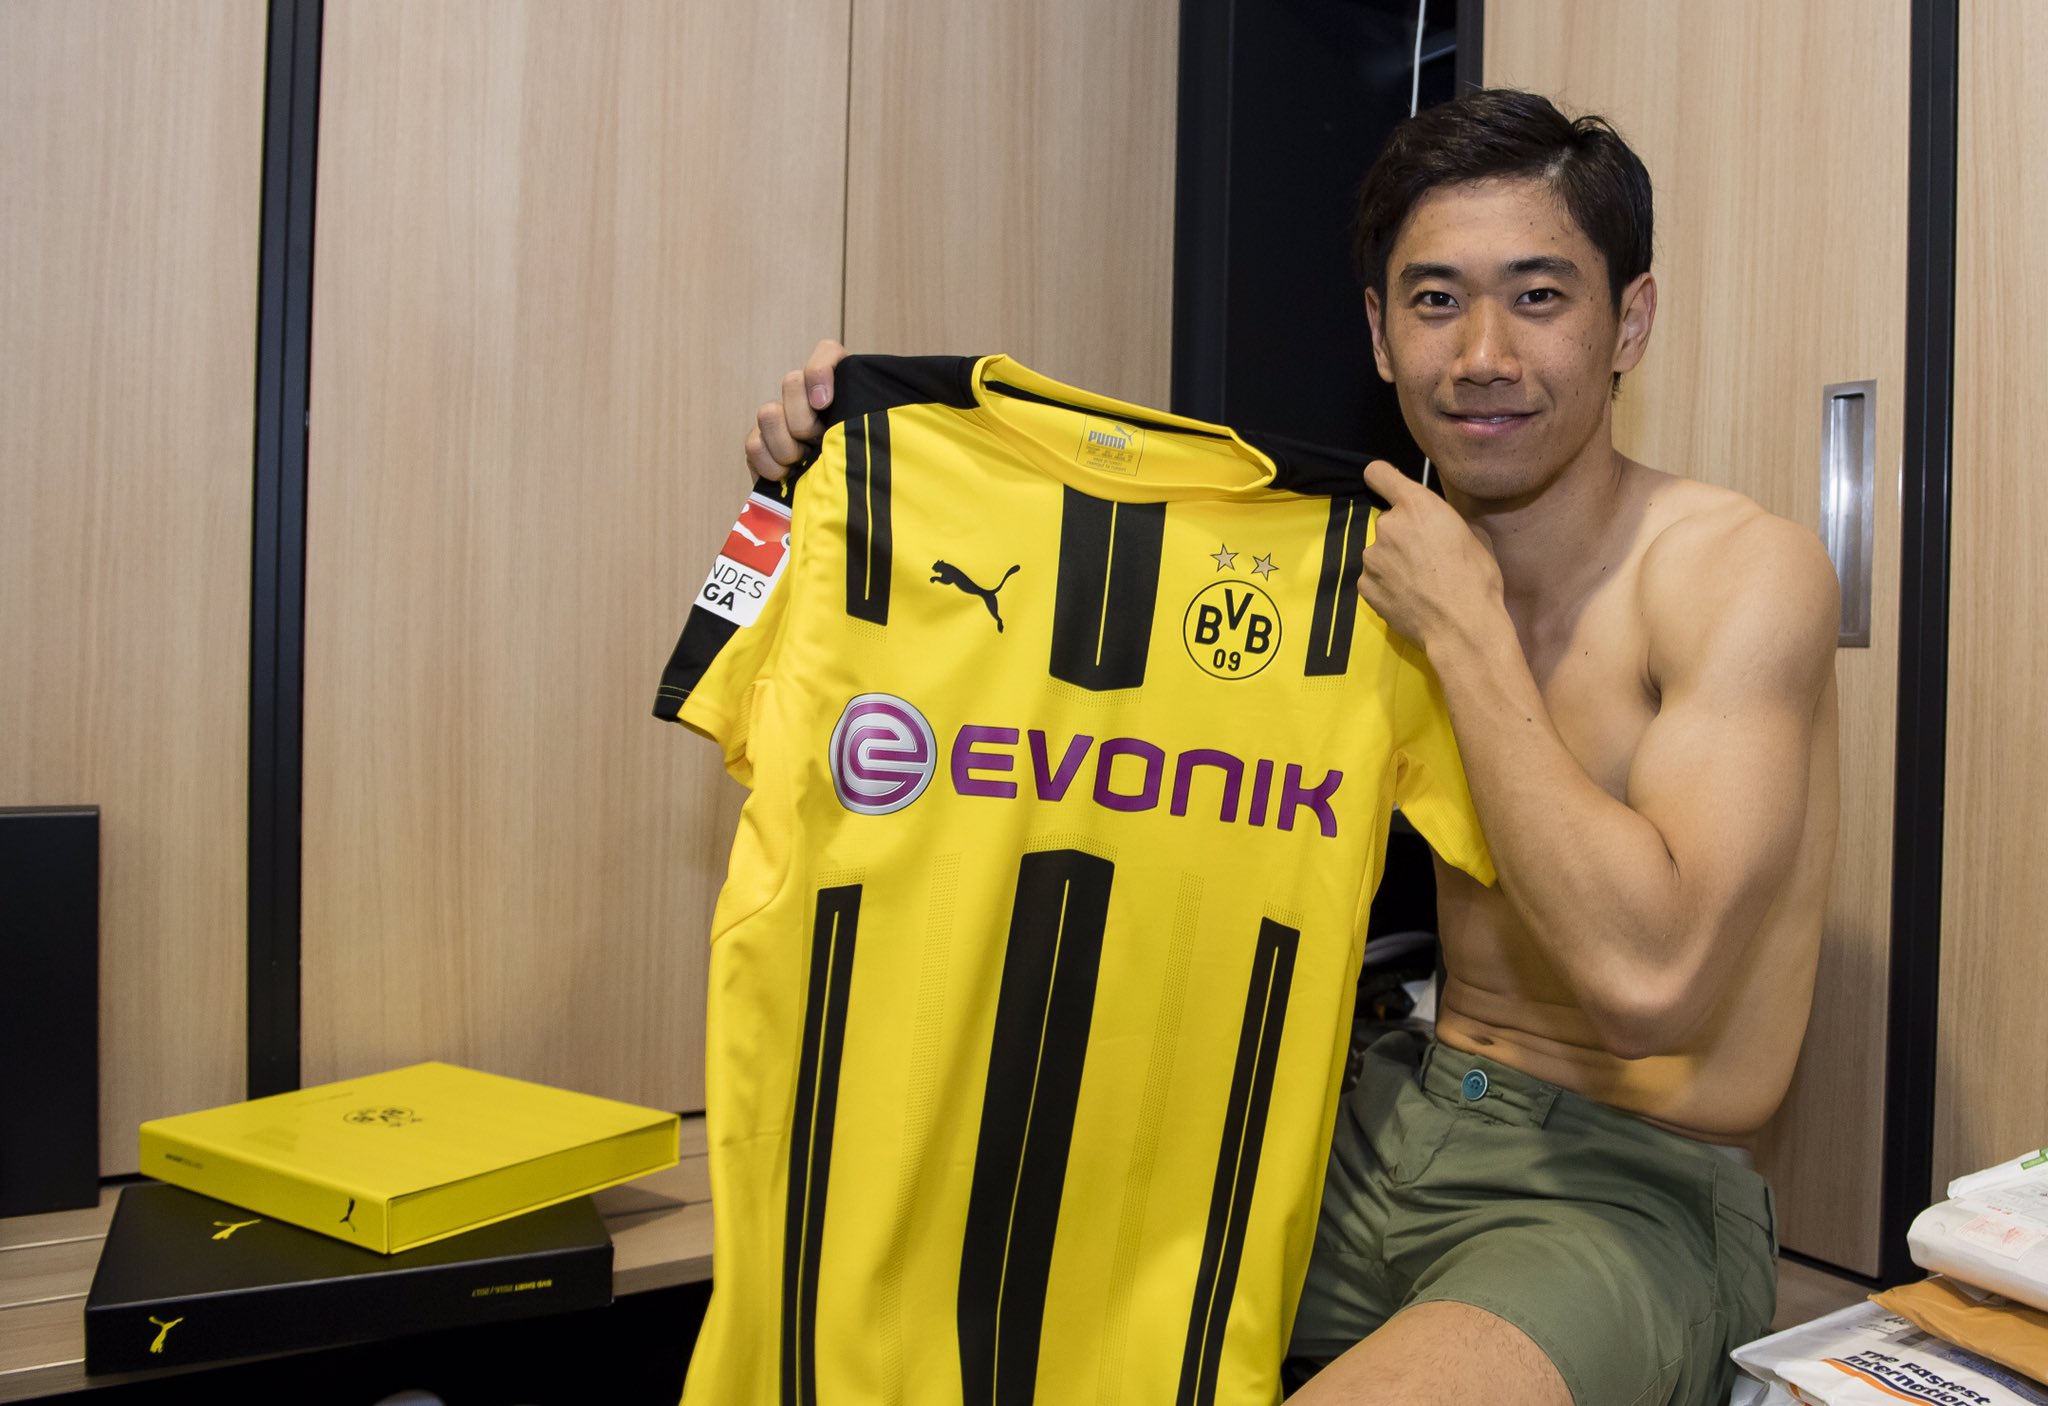 Borussia Dortmund Icymi Bvb And Pumafootball Present The New Home Jersey T Co Zjynuhtpnl T Co Inwvbx8emg Twitter